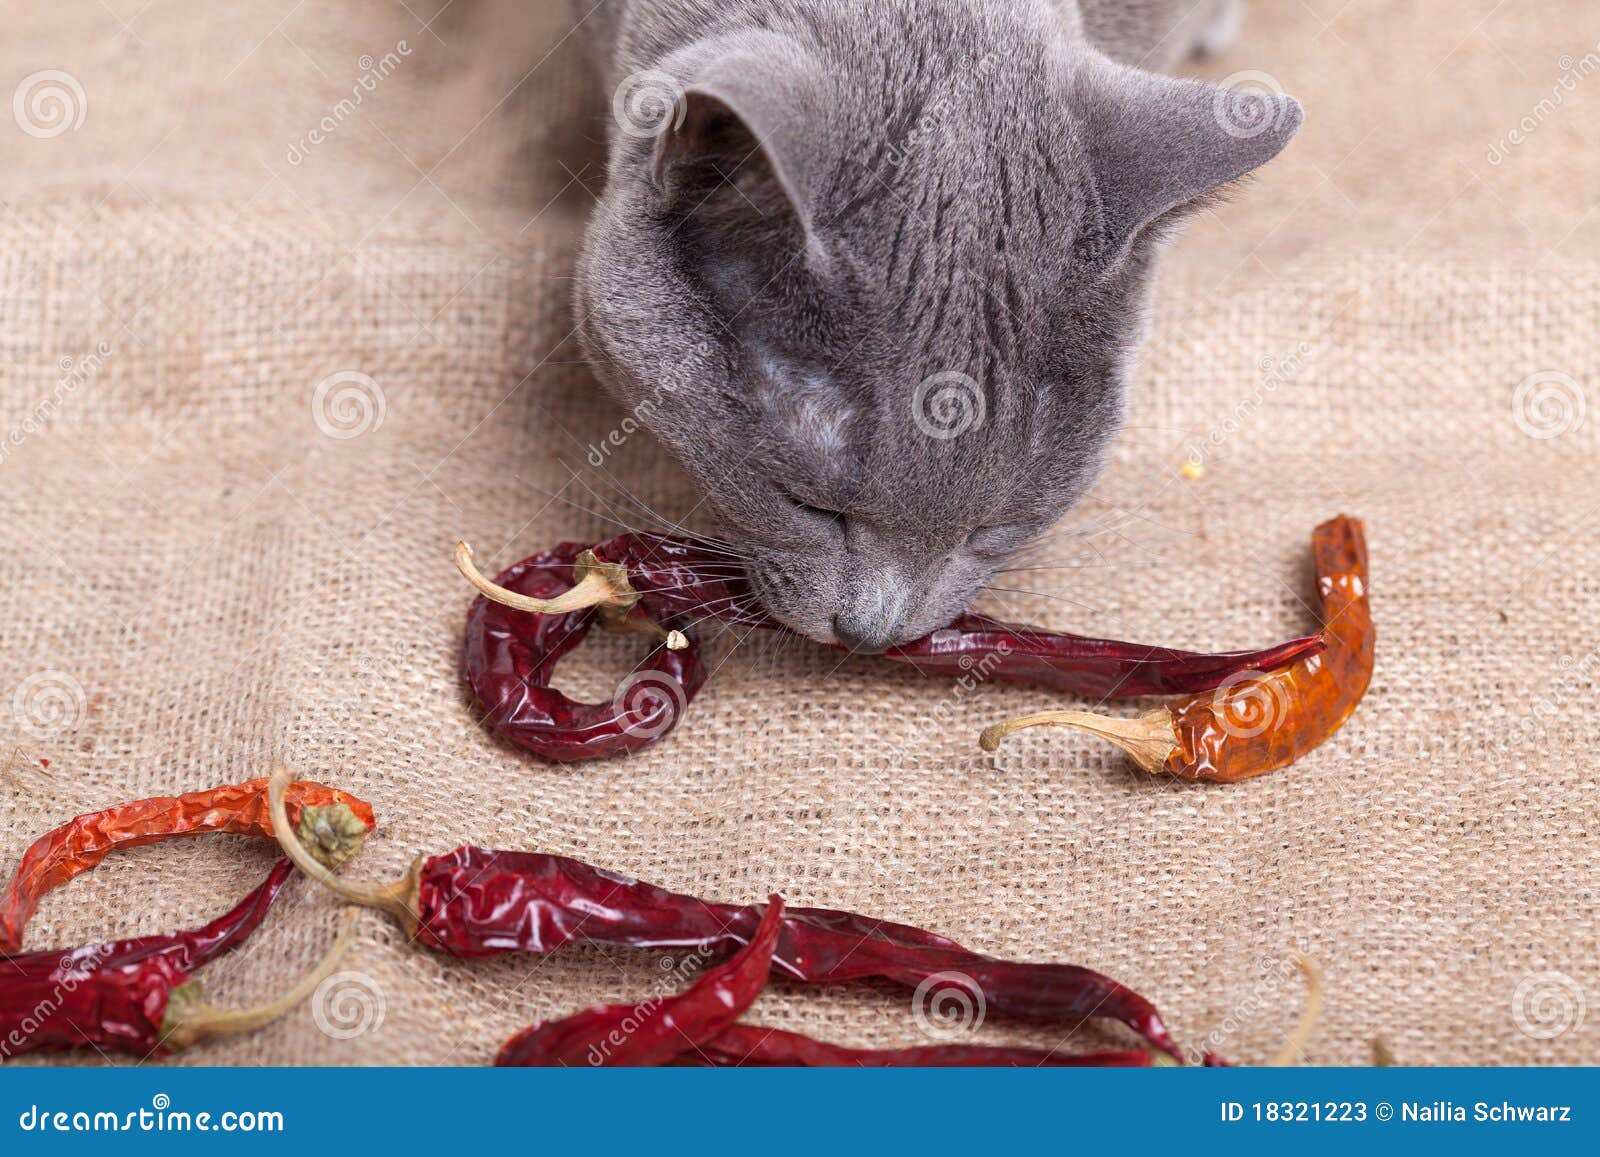 Cat eating Chili stock image. Image of ingredient, healthy ...